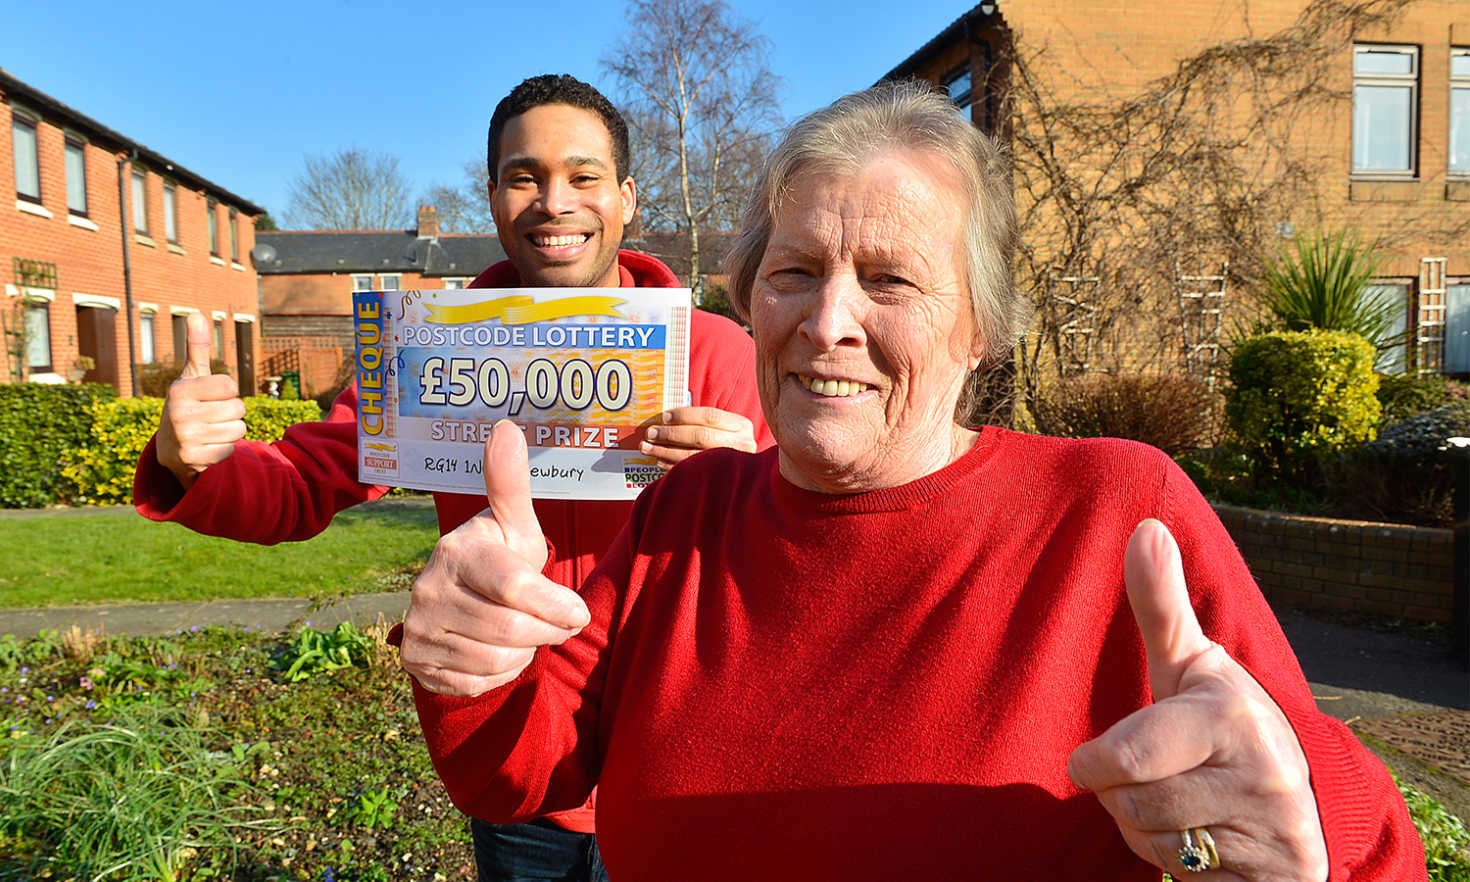 Jean from Newbury won a fantastic £50,000 this weekend